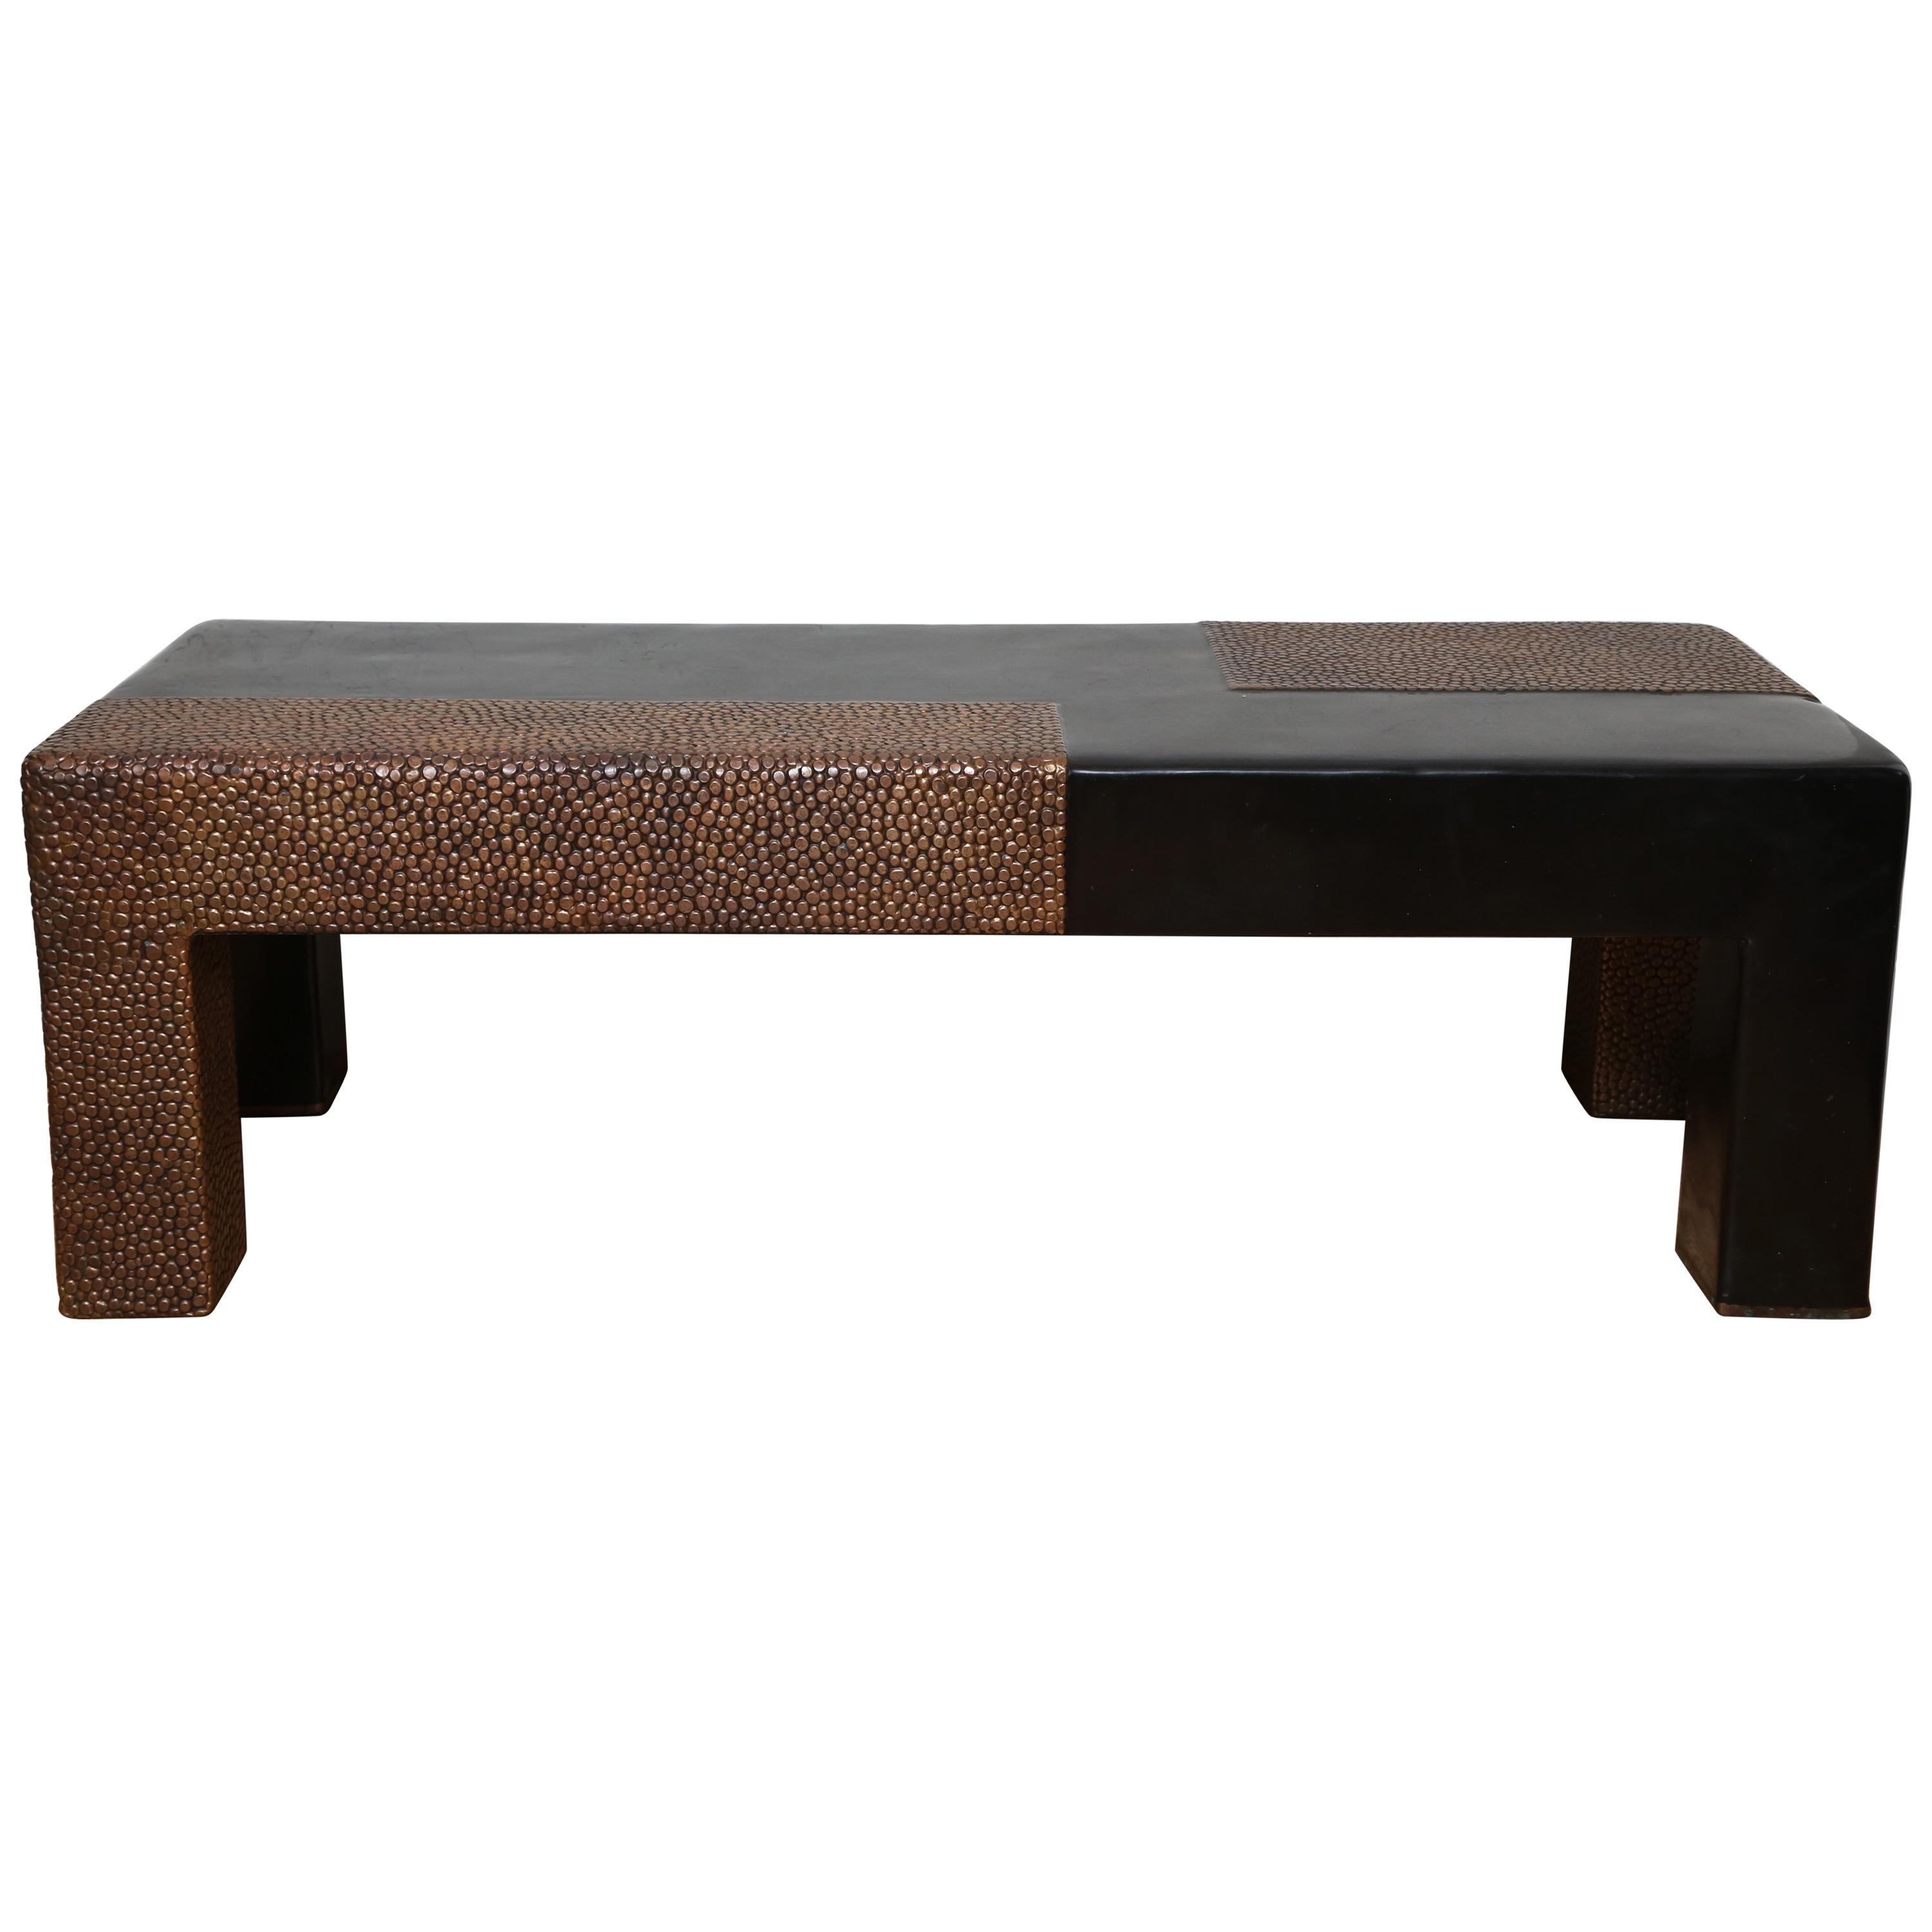 Black Lacquer and Copper Repousse' Table or Bench by Robert Kuo For Sale